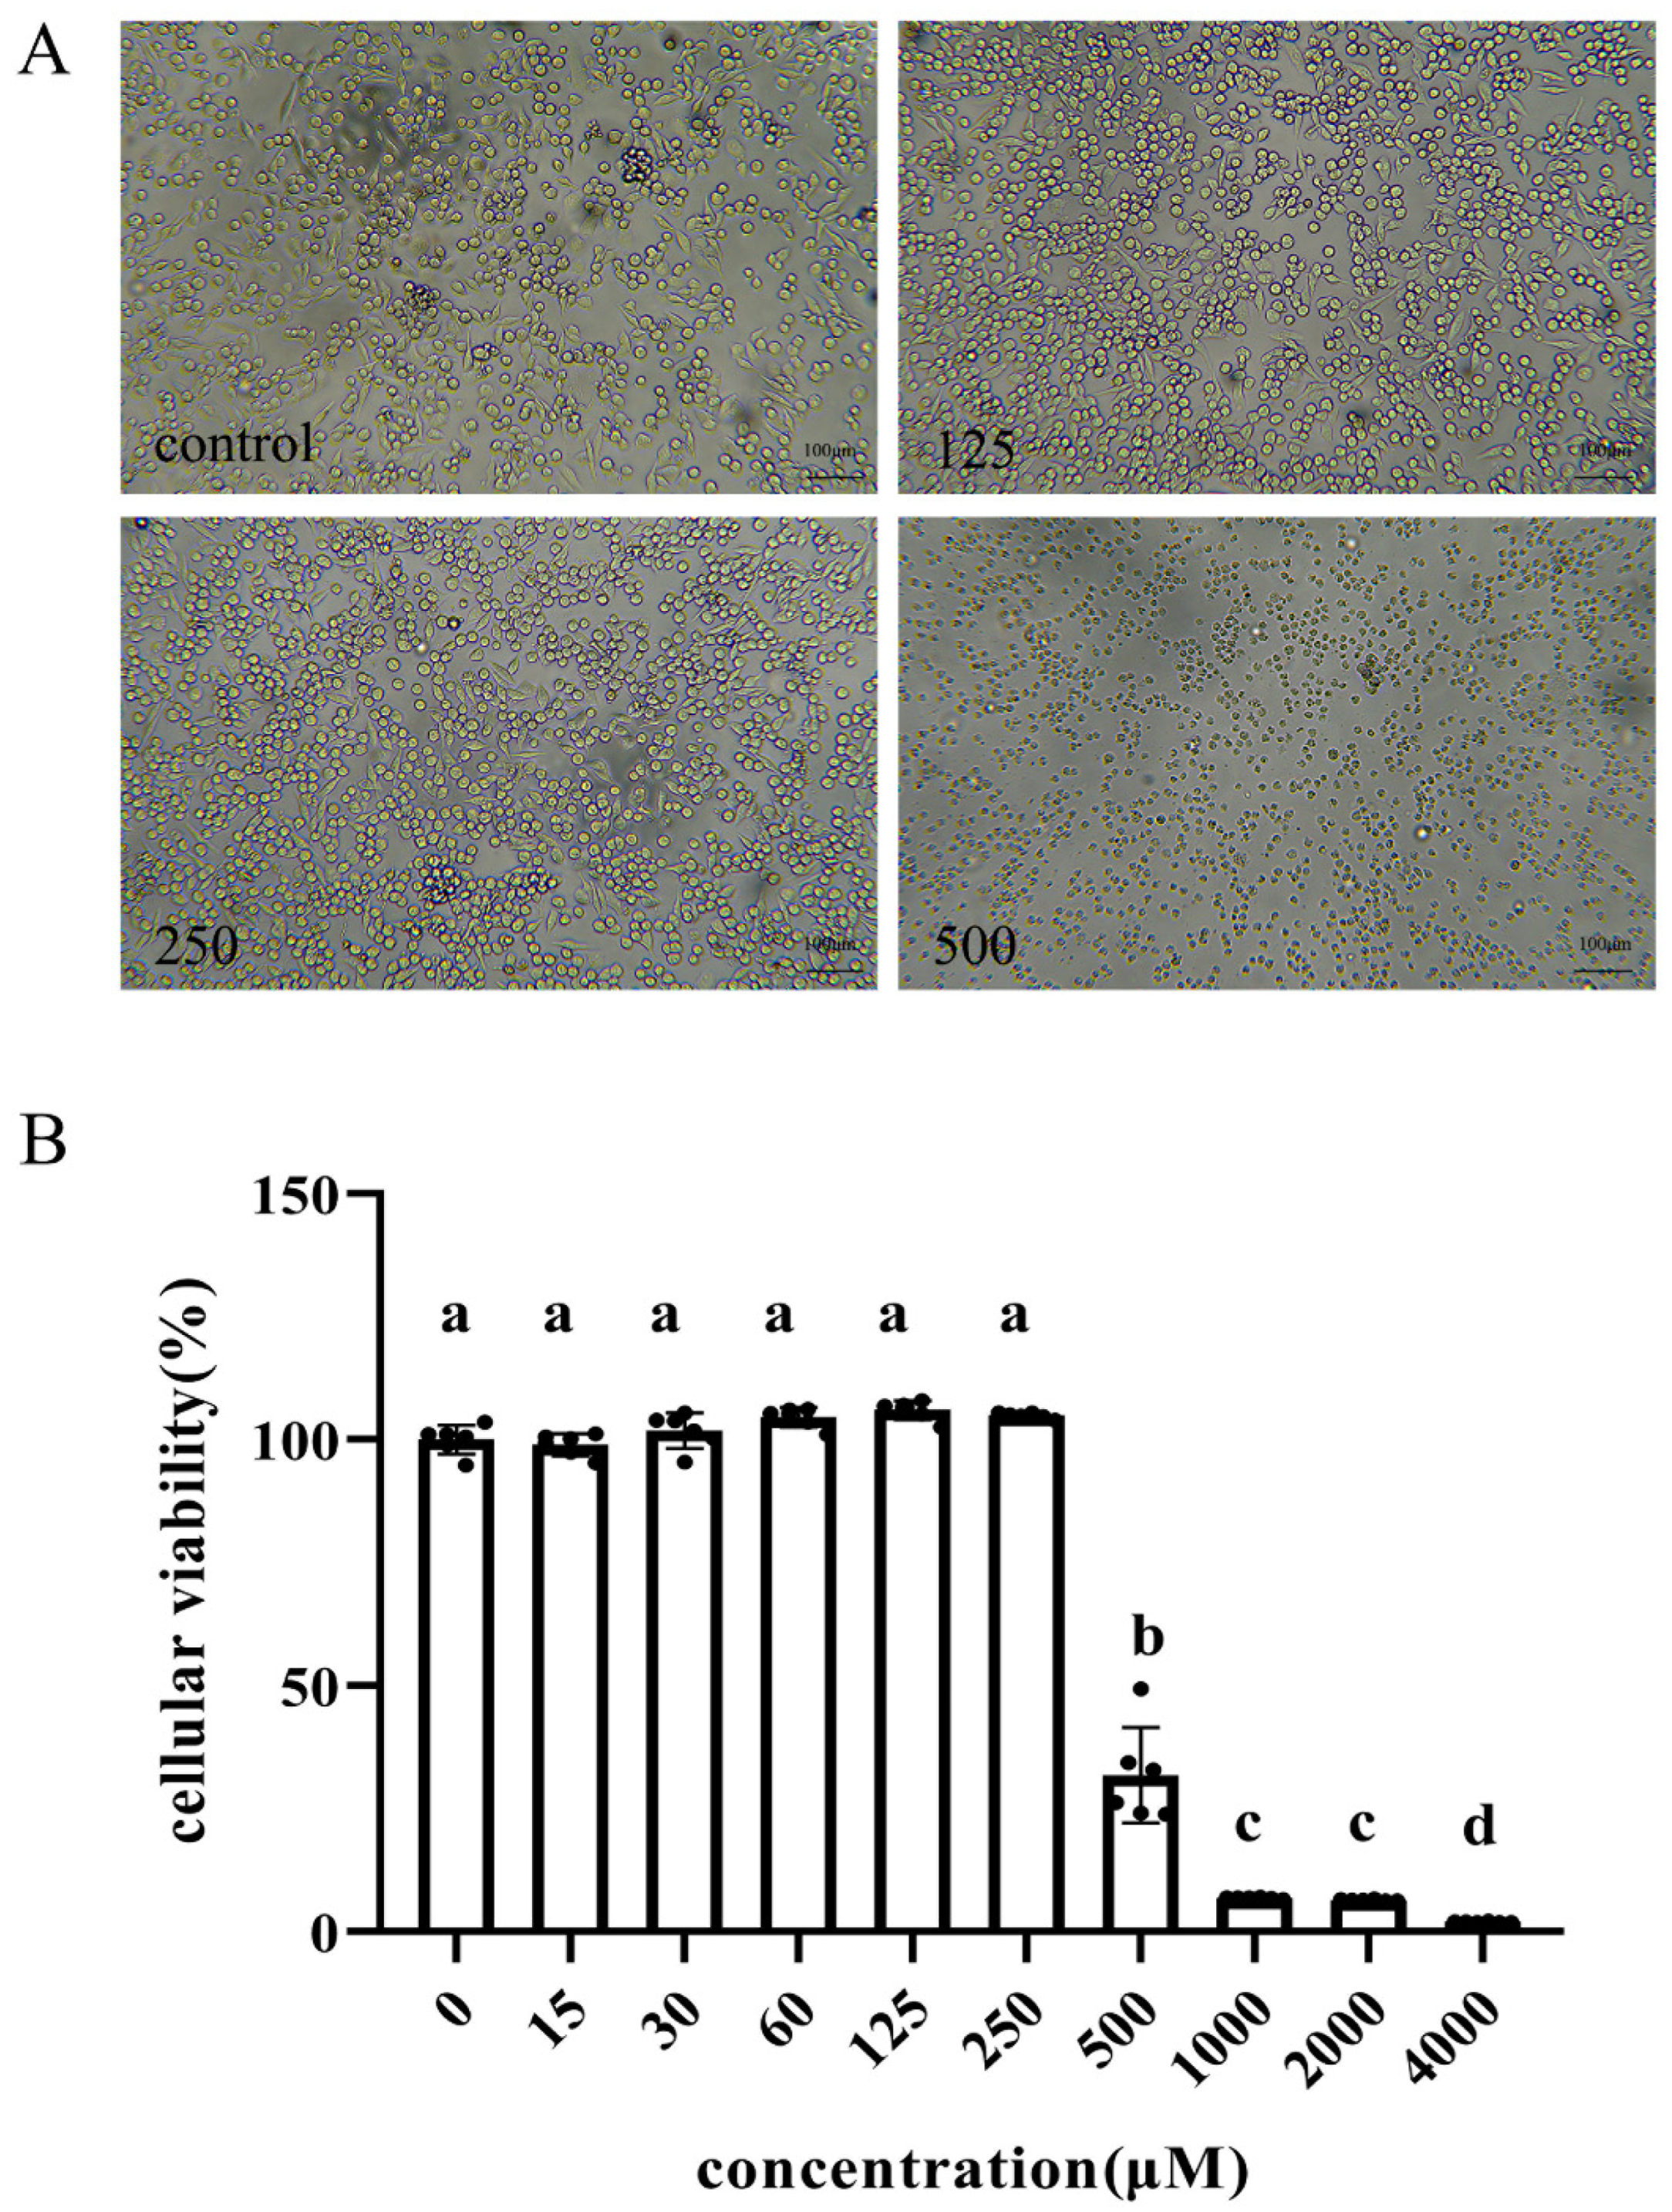 Antioxidants | Free Full-Text | Bacterial Metabolite Reuterin Attenuated LPS-Induced  Oxidative Stress and Inflammation Response in HD11 Macrophages